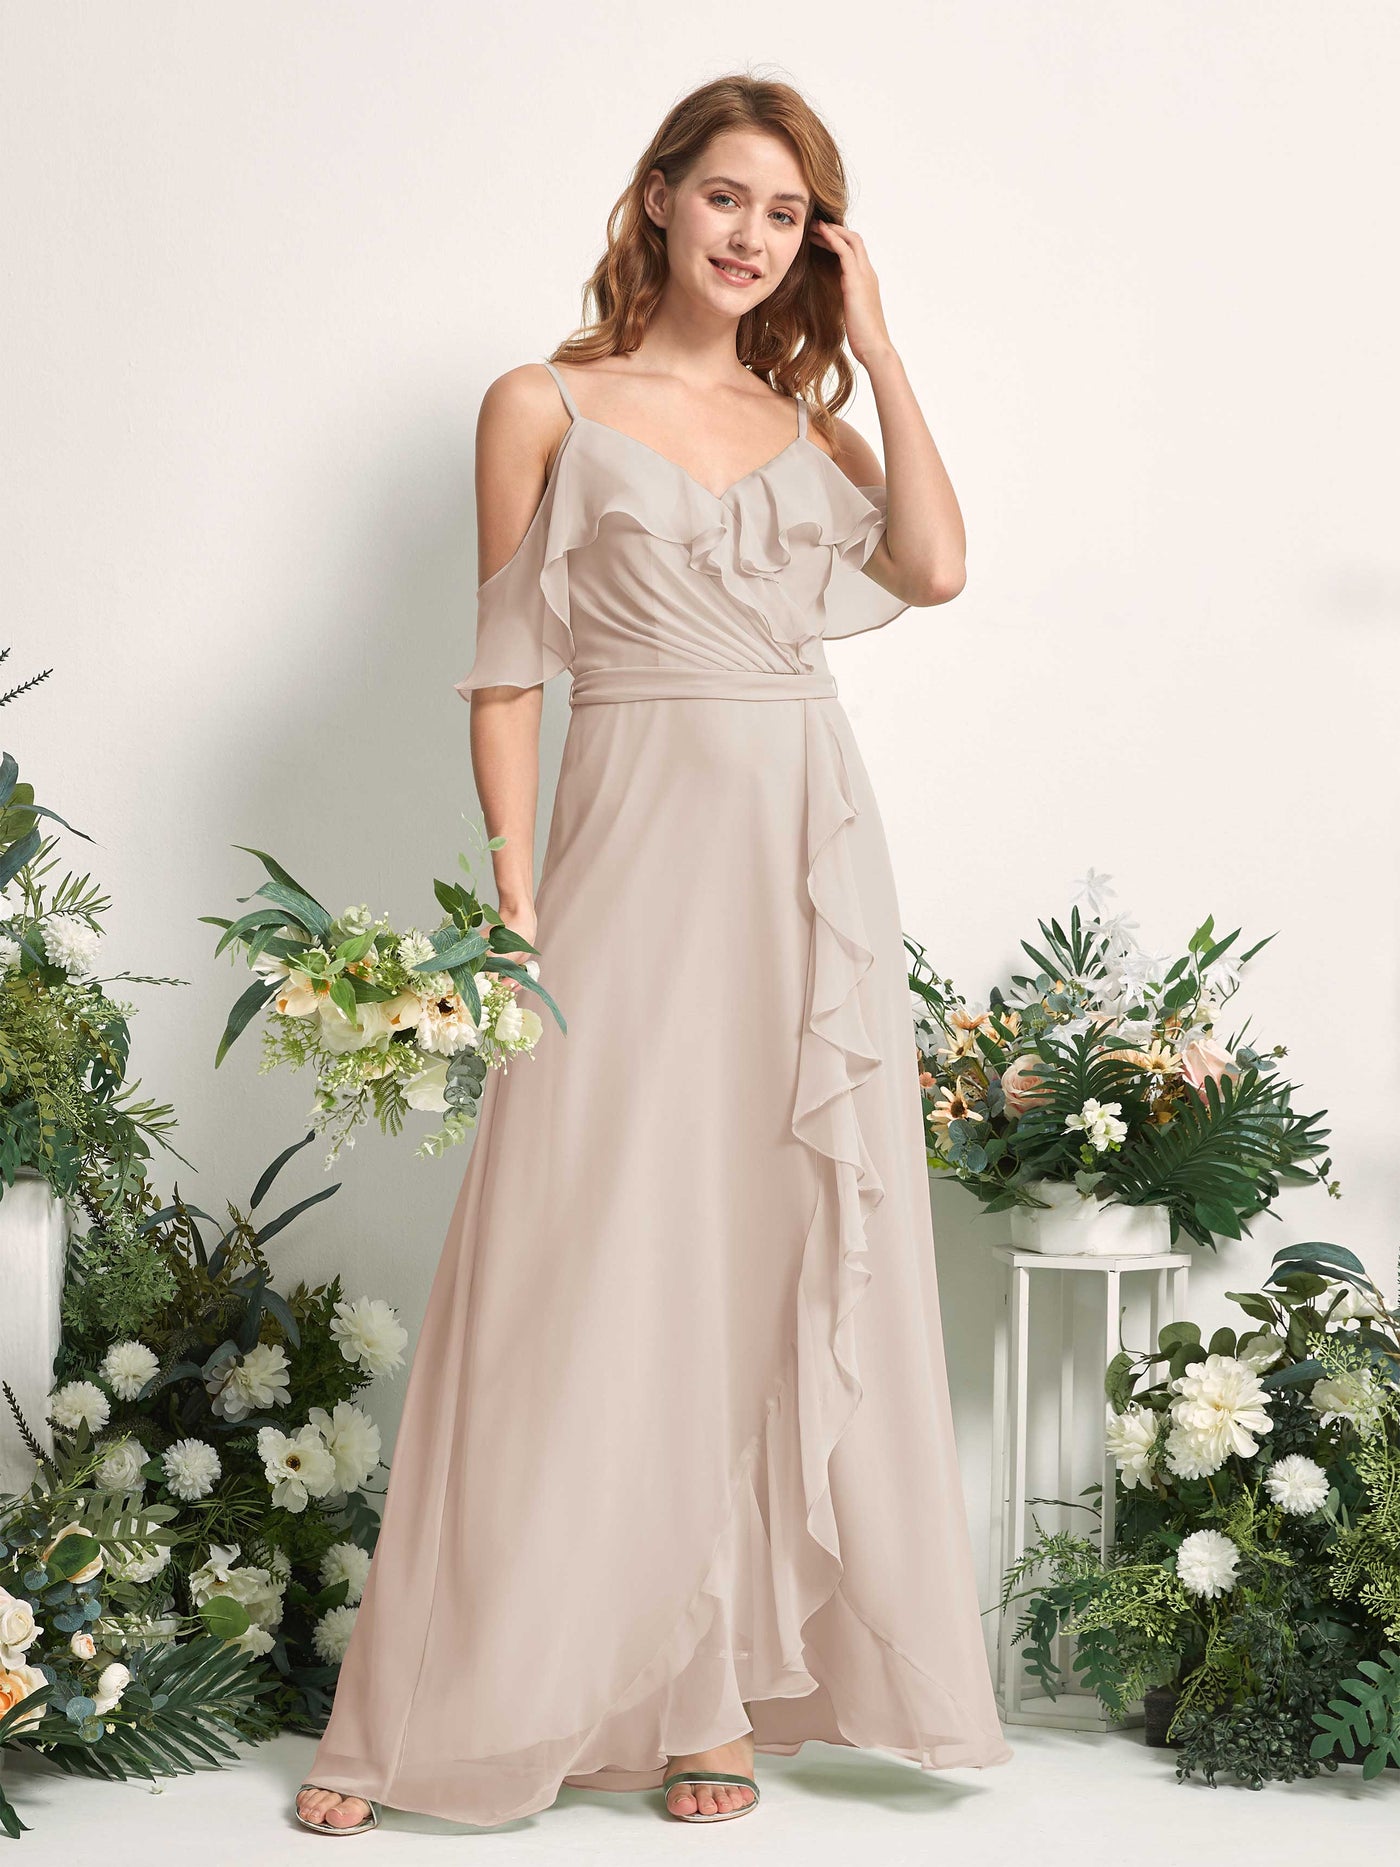 Bridesmaid Dress A-line Chiffon Spaghetti-straps Full Length Sleeveless Wedding Party Dress - Champagne (81227416)#color_champagne